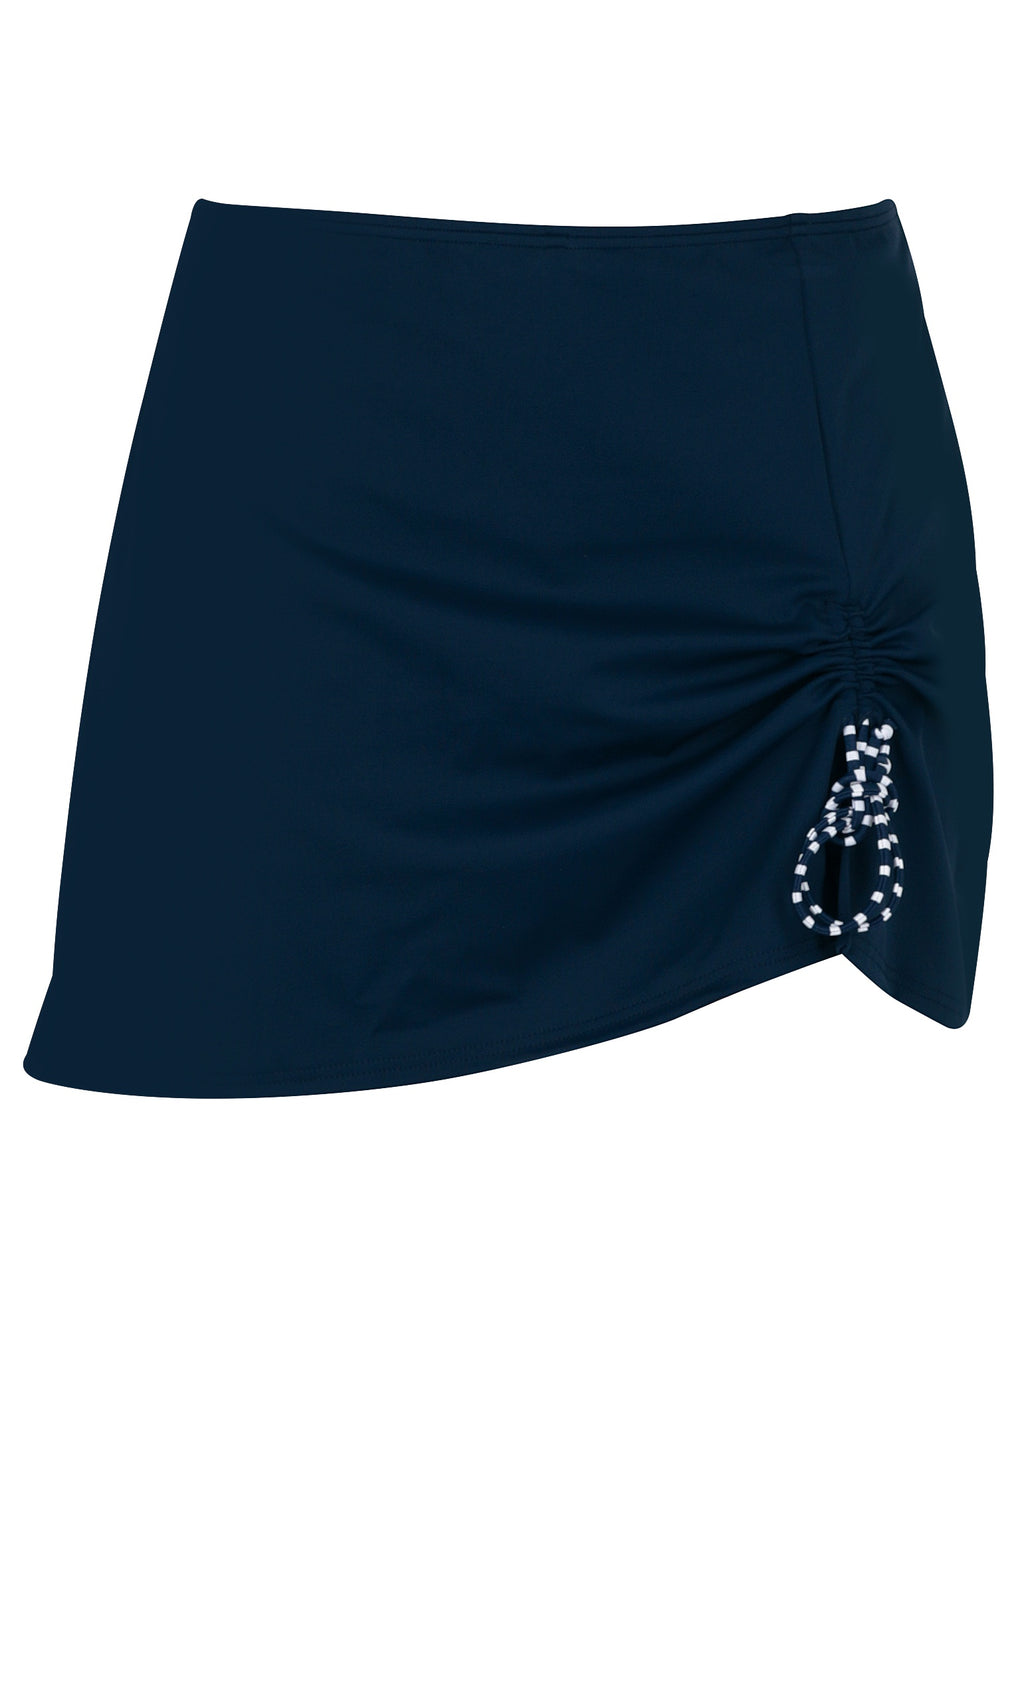 Skirt with Inner Shorts Night Blue, Special Order Sizes S - 3XL